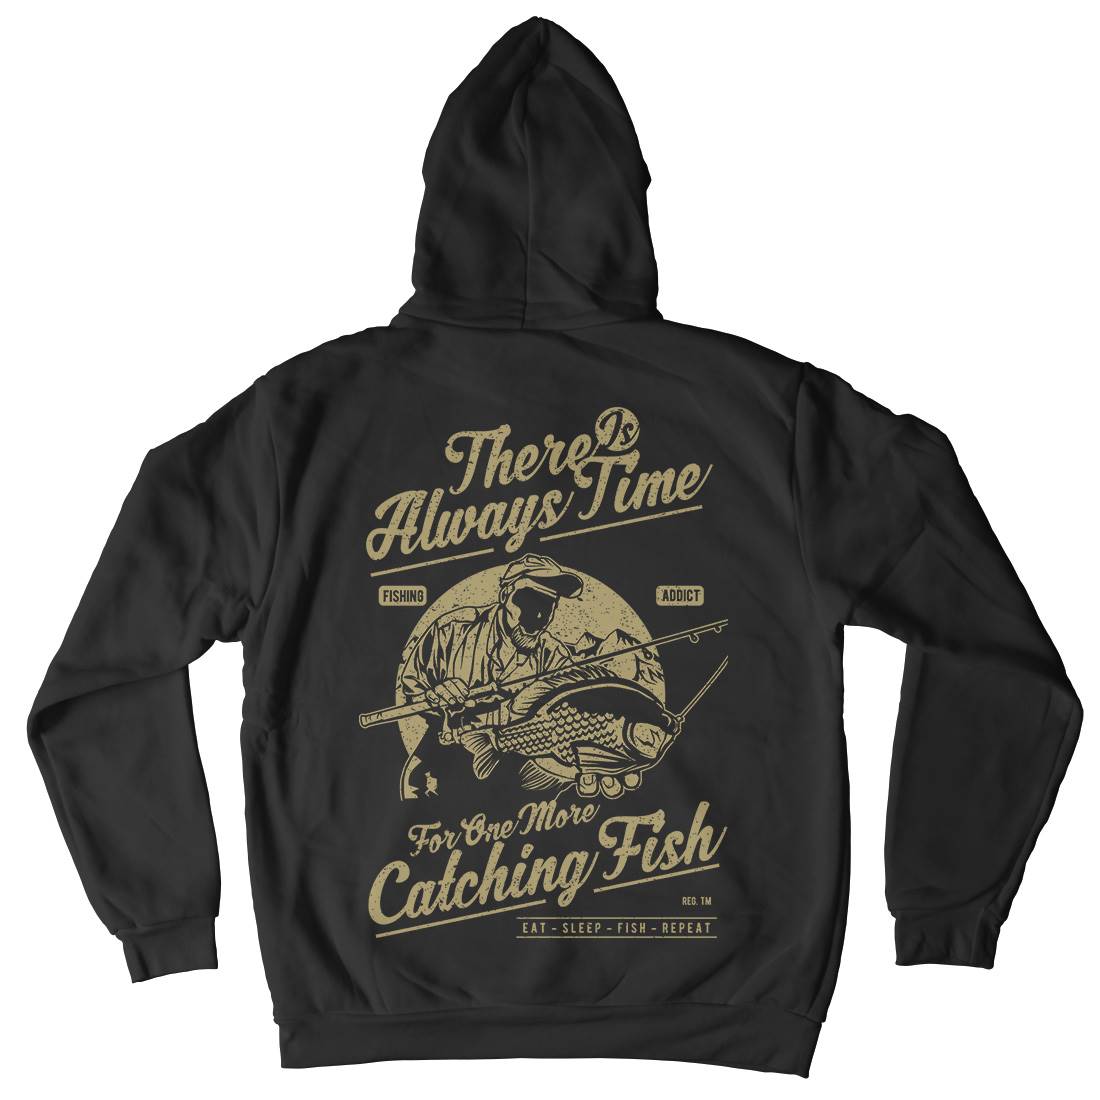 One More Catching Mens Hoodie With Pocket Fishing A731